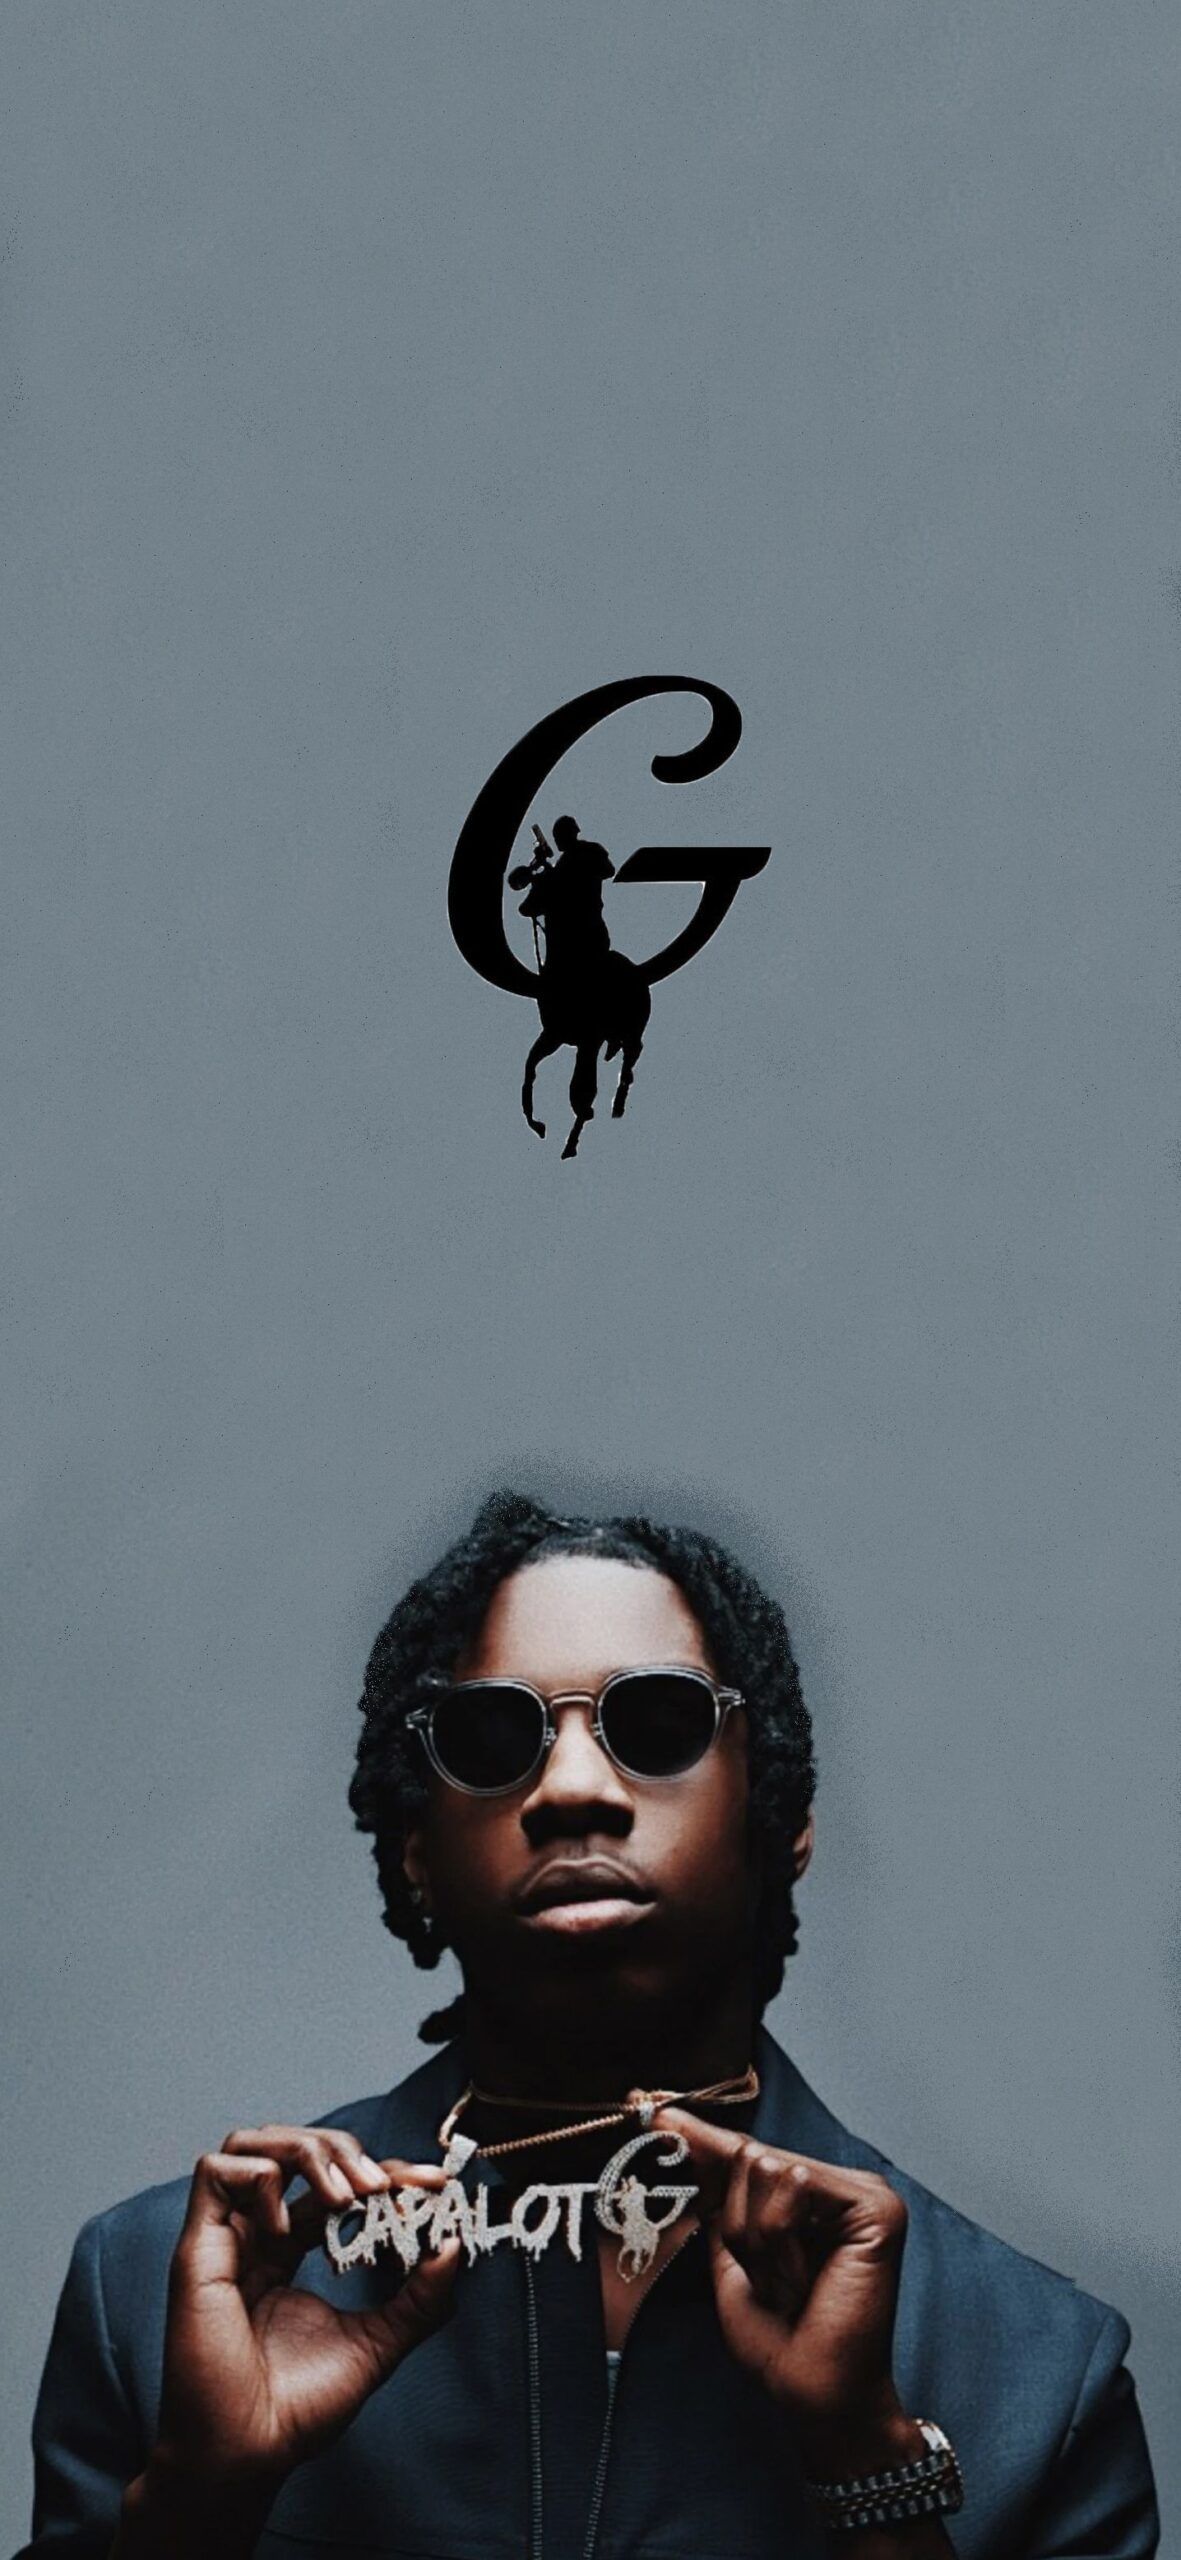 Polo G Wallpaper Discover more cool, g aesthetic, g anime, goat